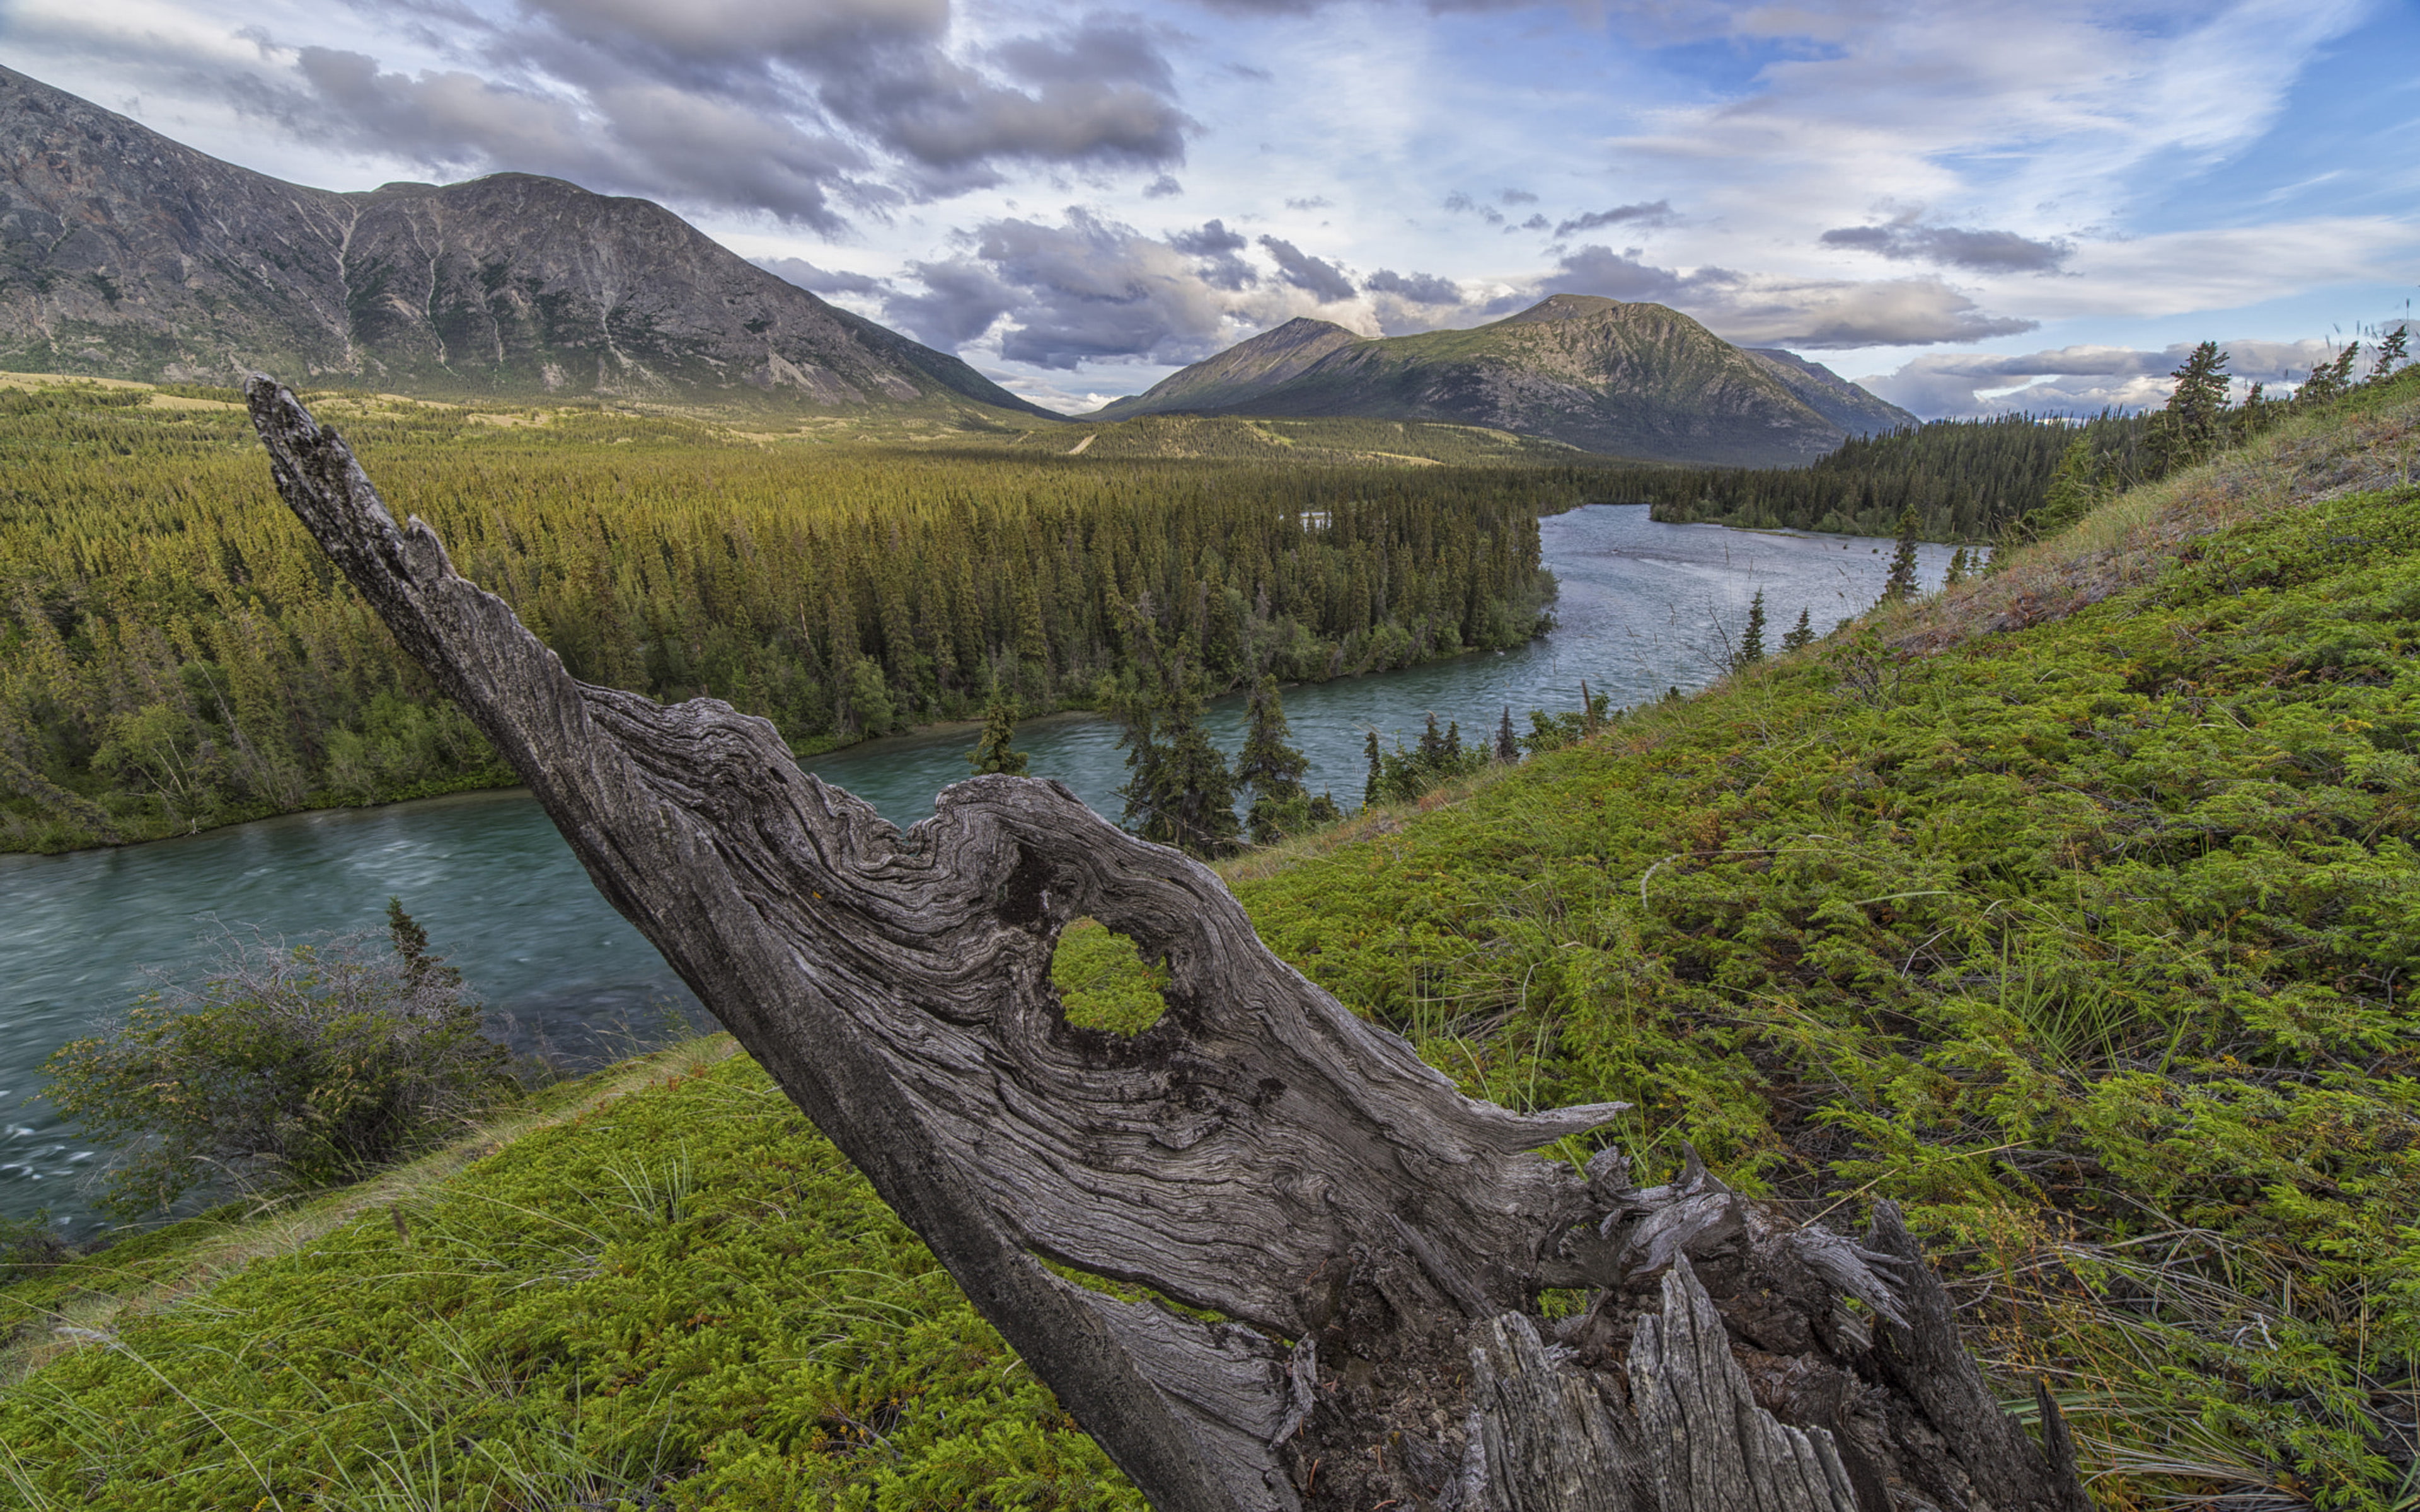 Takhini River Valley Yukon Territory Canada Nature Landscape Best Hd Desktop Wallpapers For Tablets And Mobile Phones Free Download 3840х2400